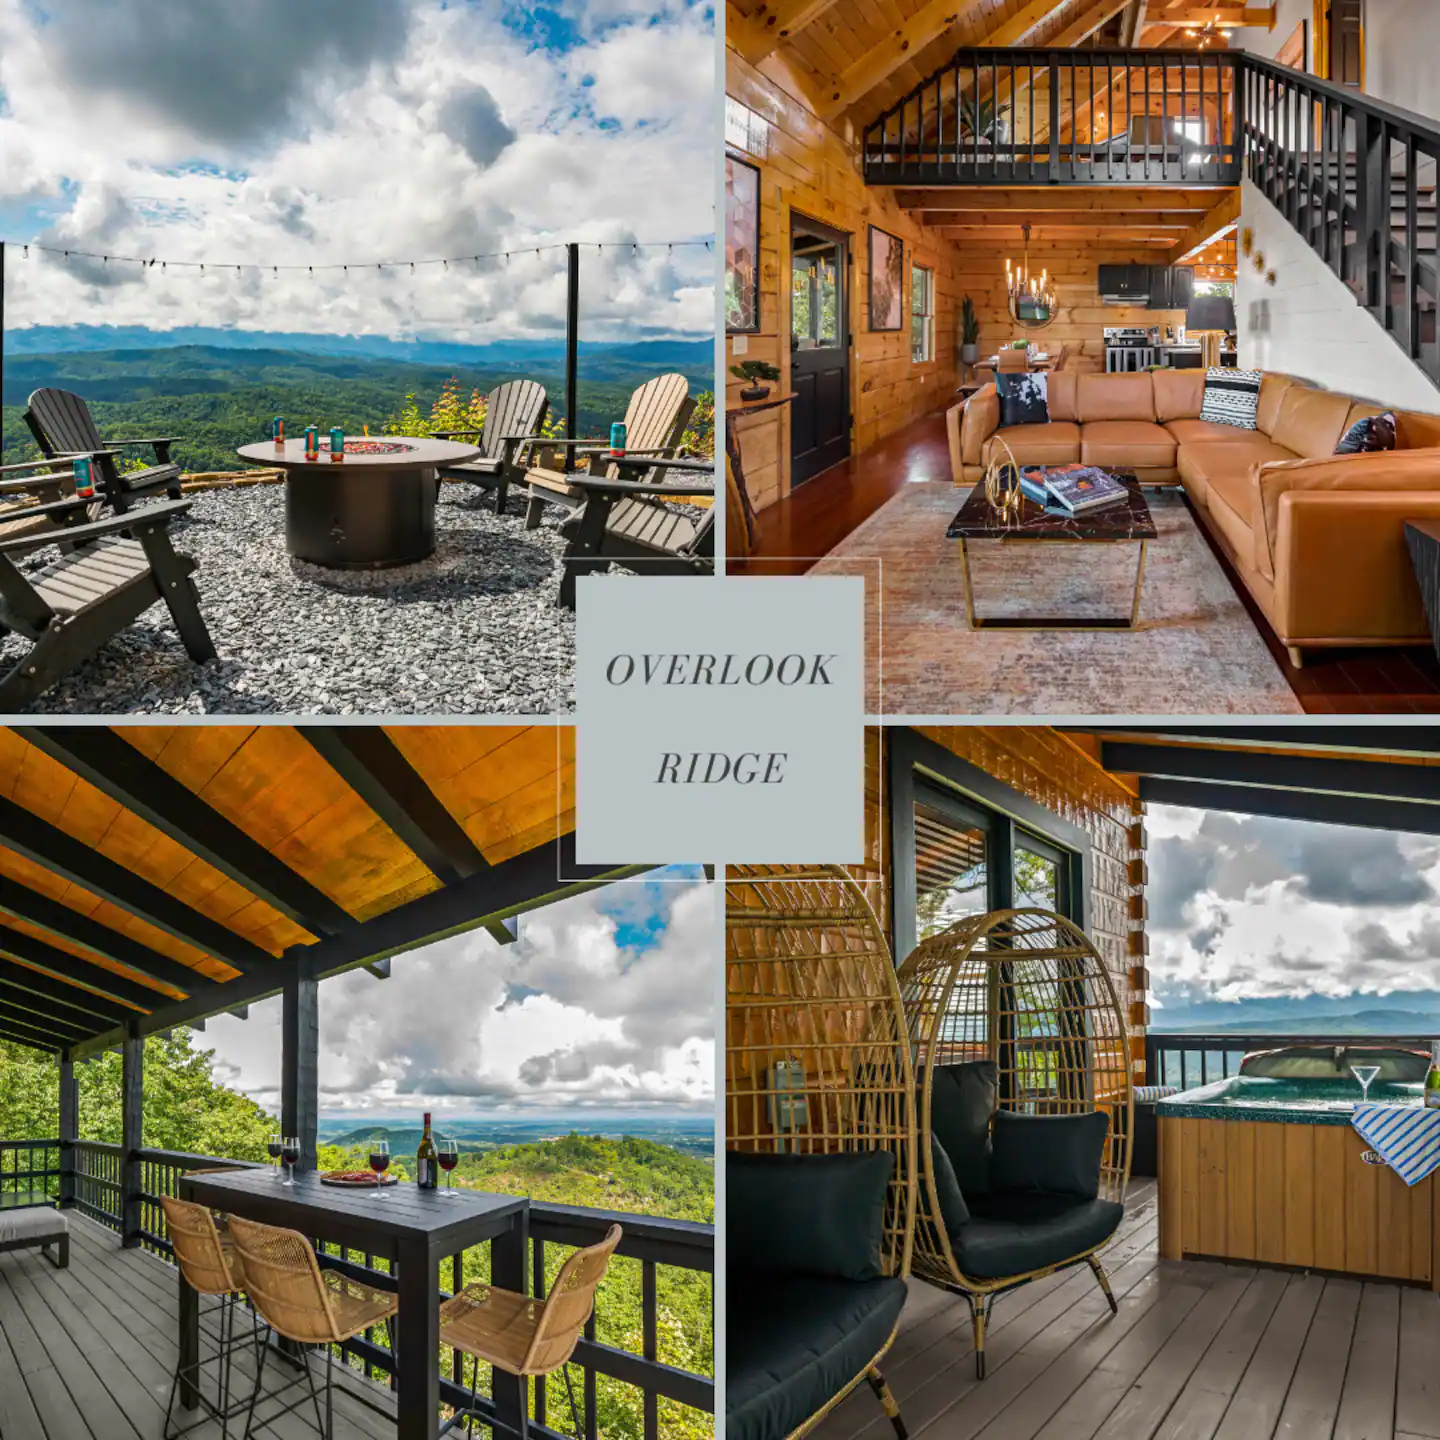 Luxury Cabin Rental near Pigeon Forge with views